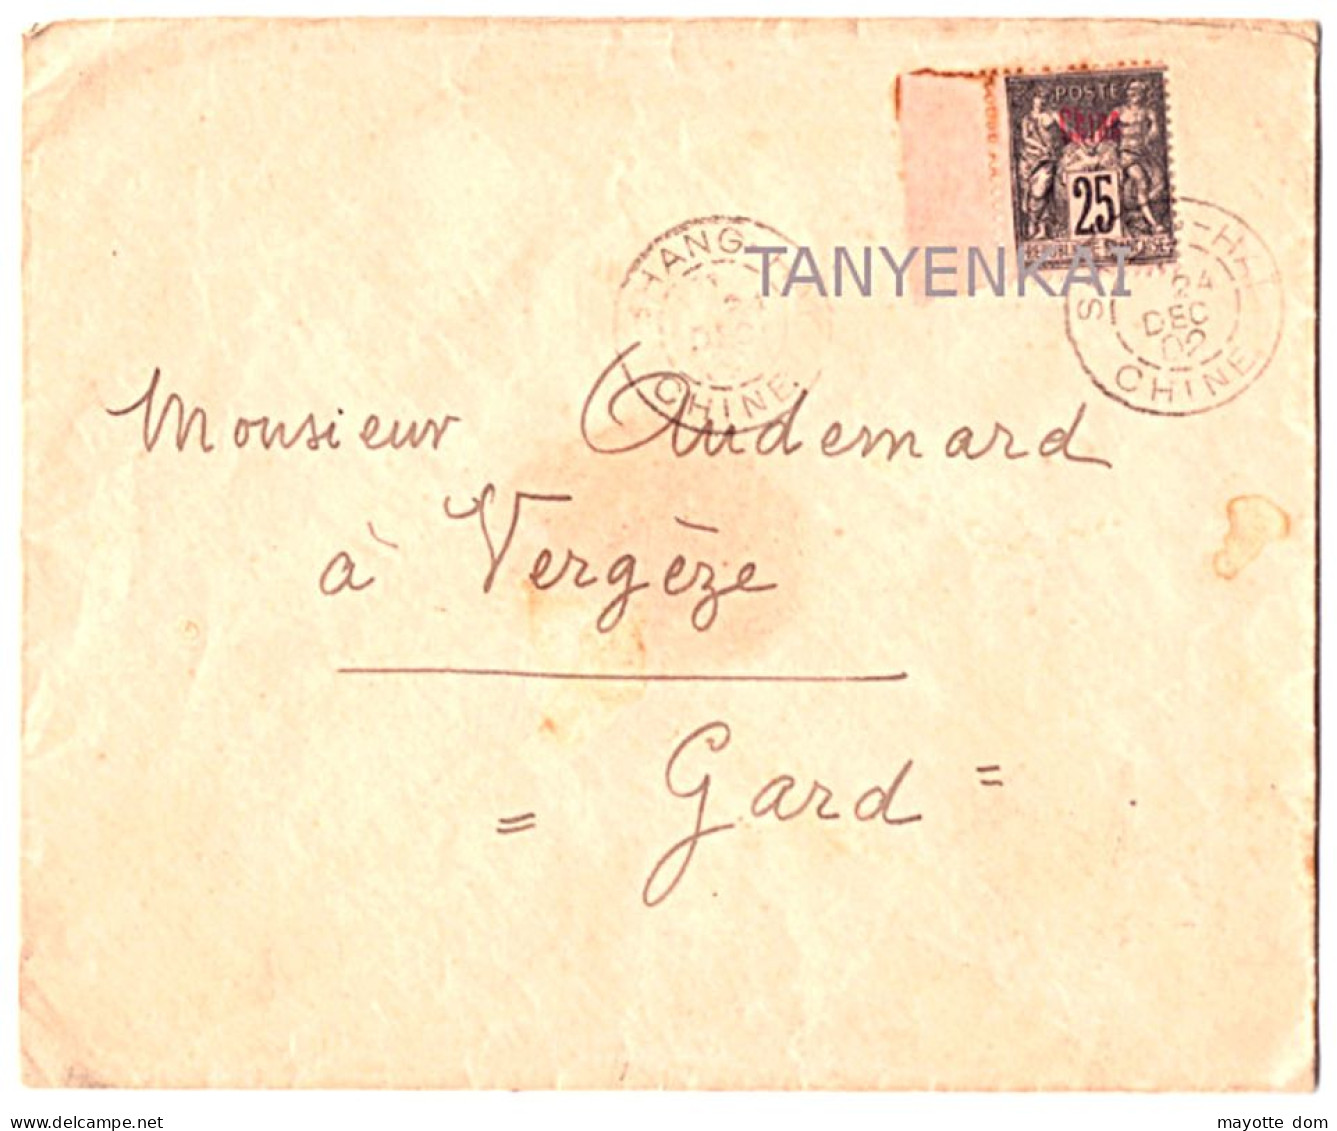 CHINA Chine 1902 Shang Hai Shanghai French PO France Audemard OLRY Cover - Covers & Documents